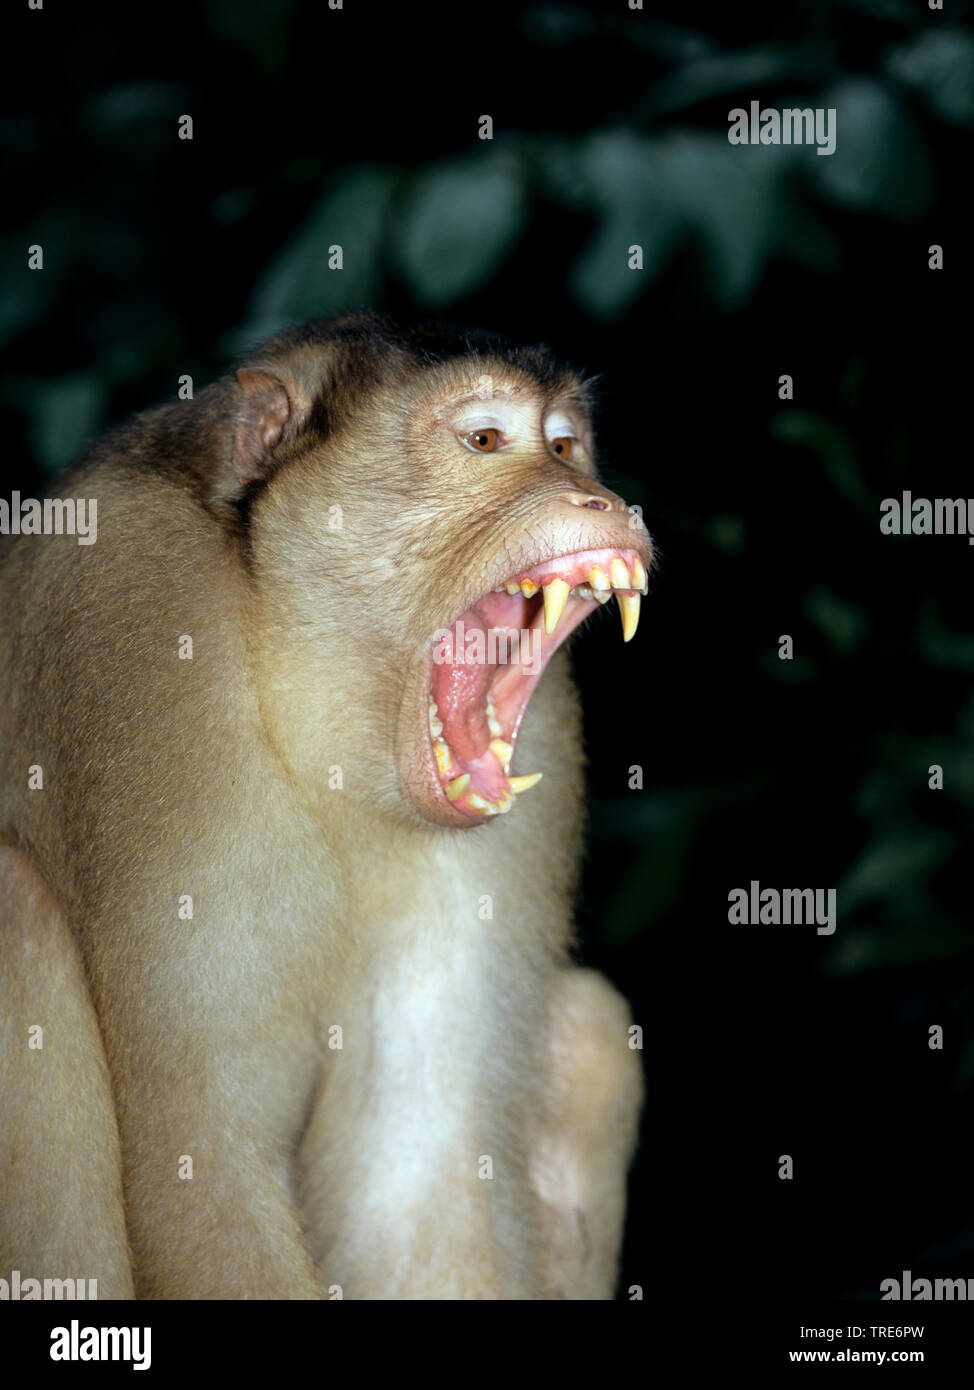 pigtail macaque (Macaca nemestrina), portrait, yelling Stock Photo